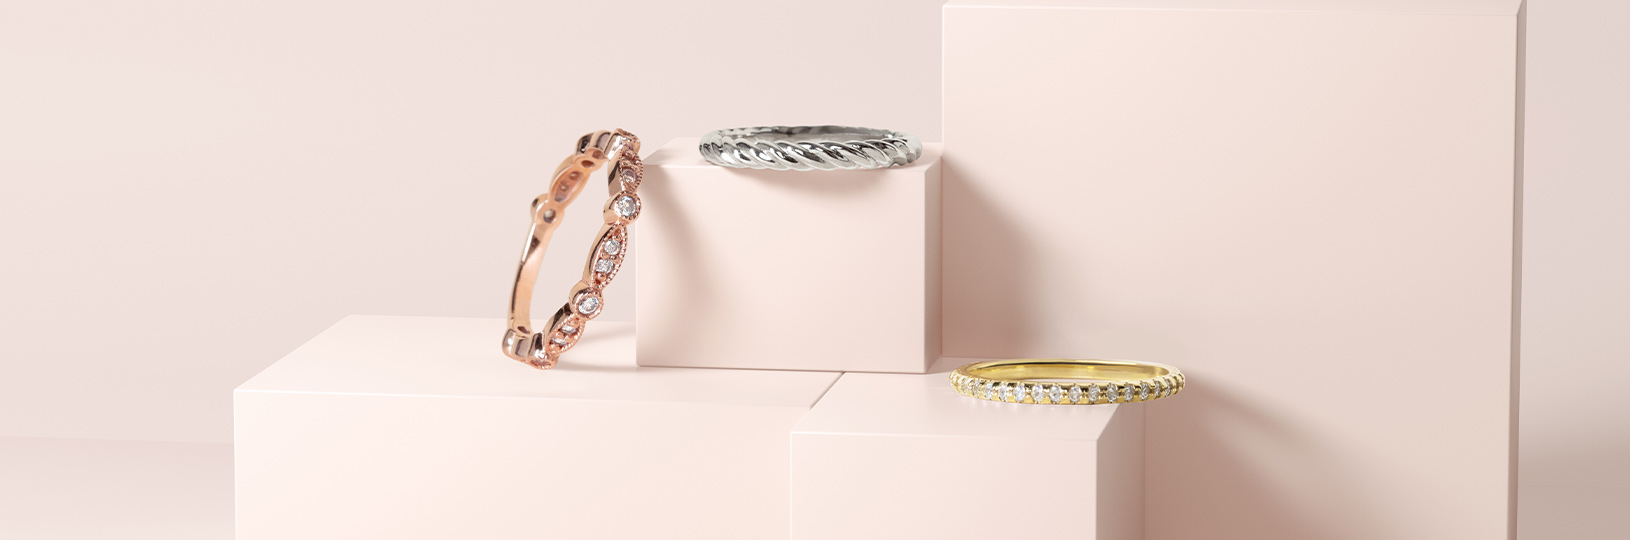 Rose gold, white gold and yellow gold wedding bands compared side by side